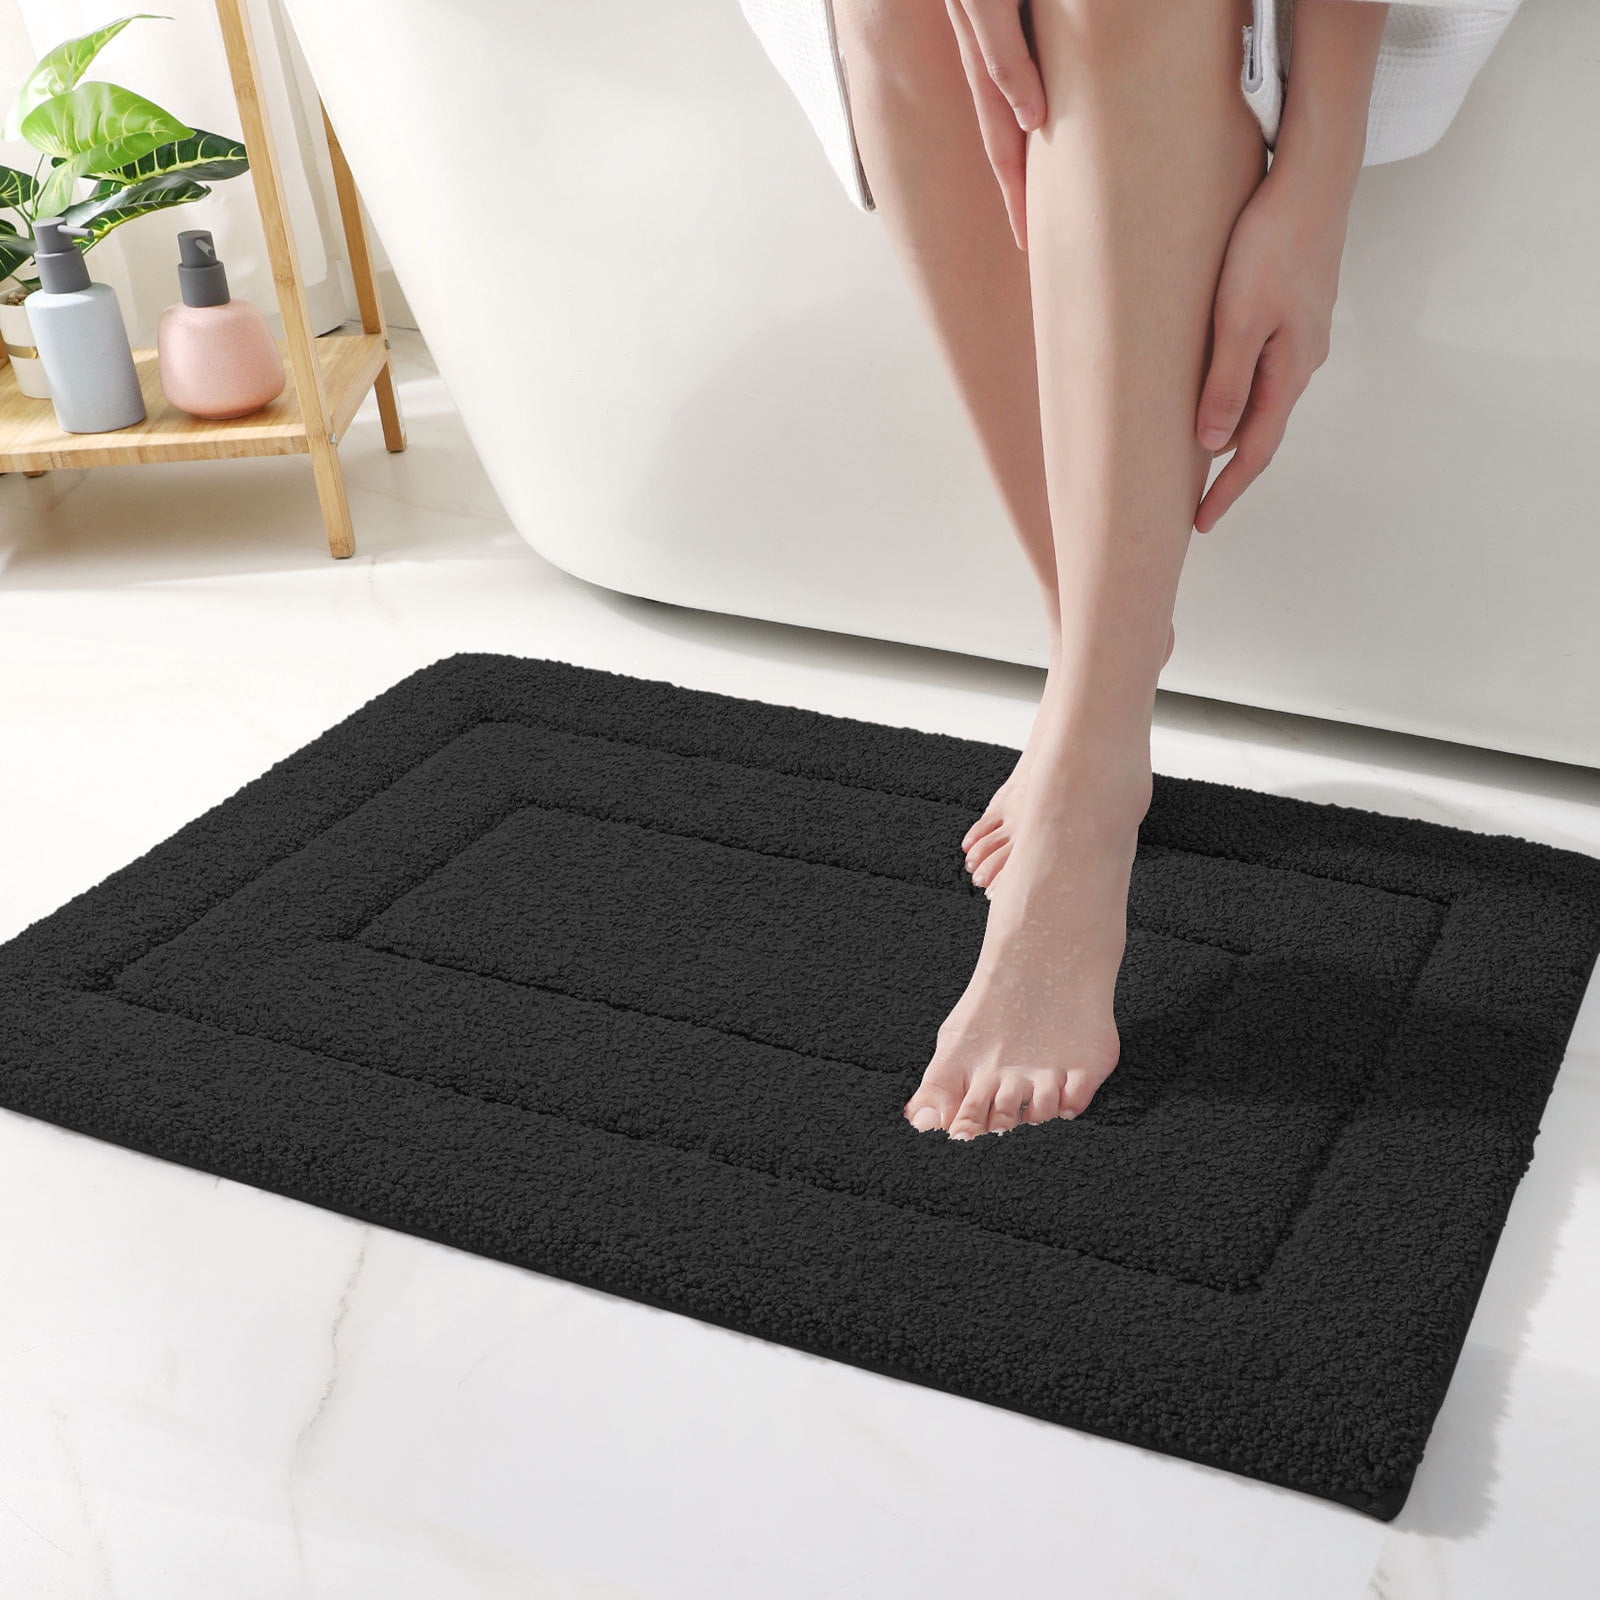 DEXI Bathroom Rug Mat, Extra Soft and Absorbent Bath Rugs, Washable  Non-Slip Carpet Mat for Bathroom Floor, Tub, Shower Room (24x16, White)